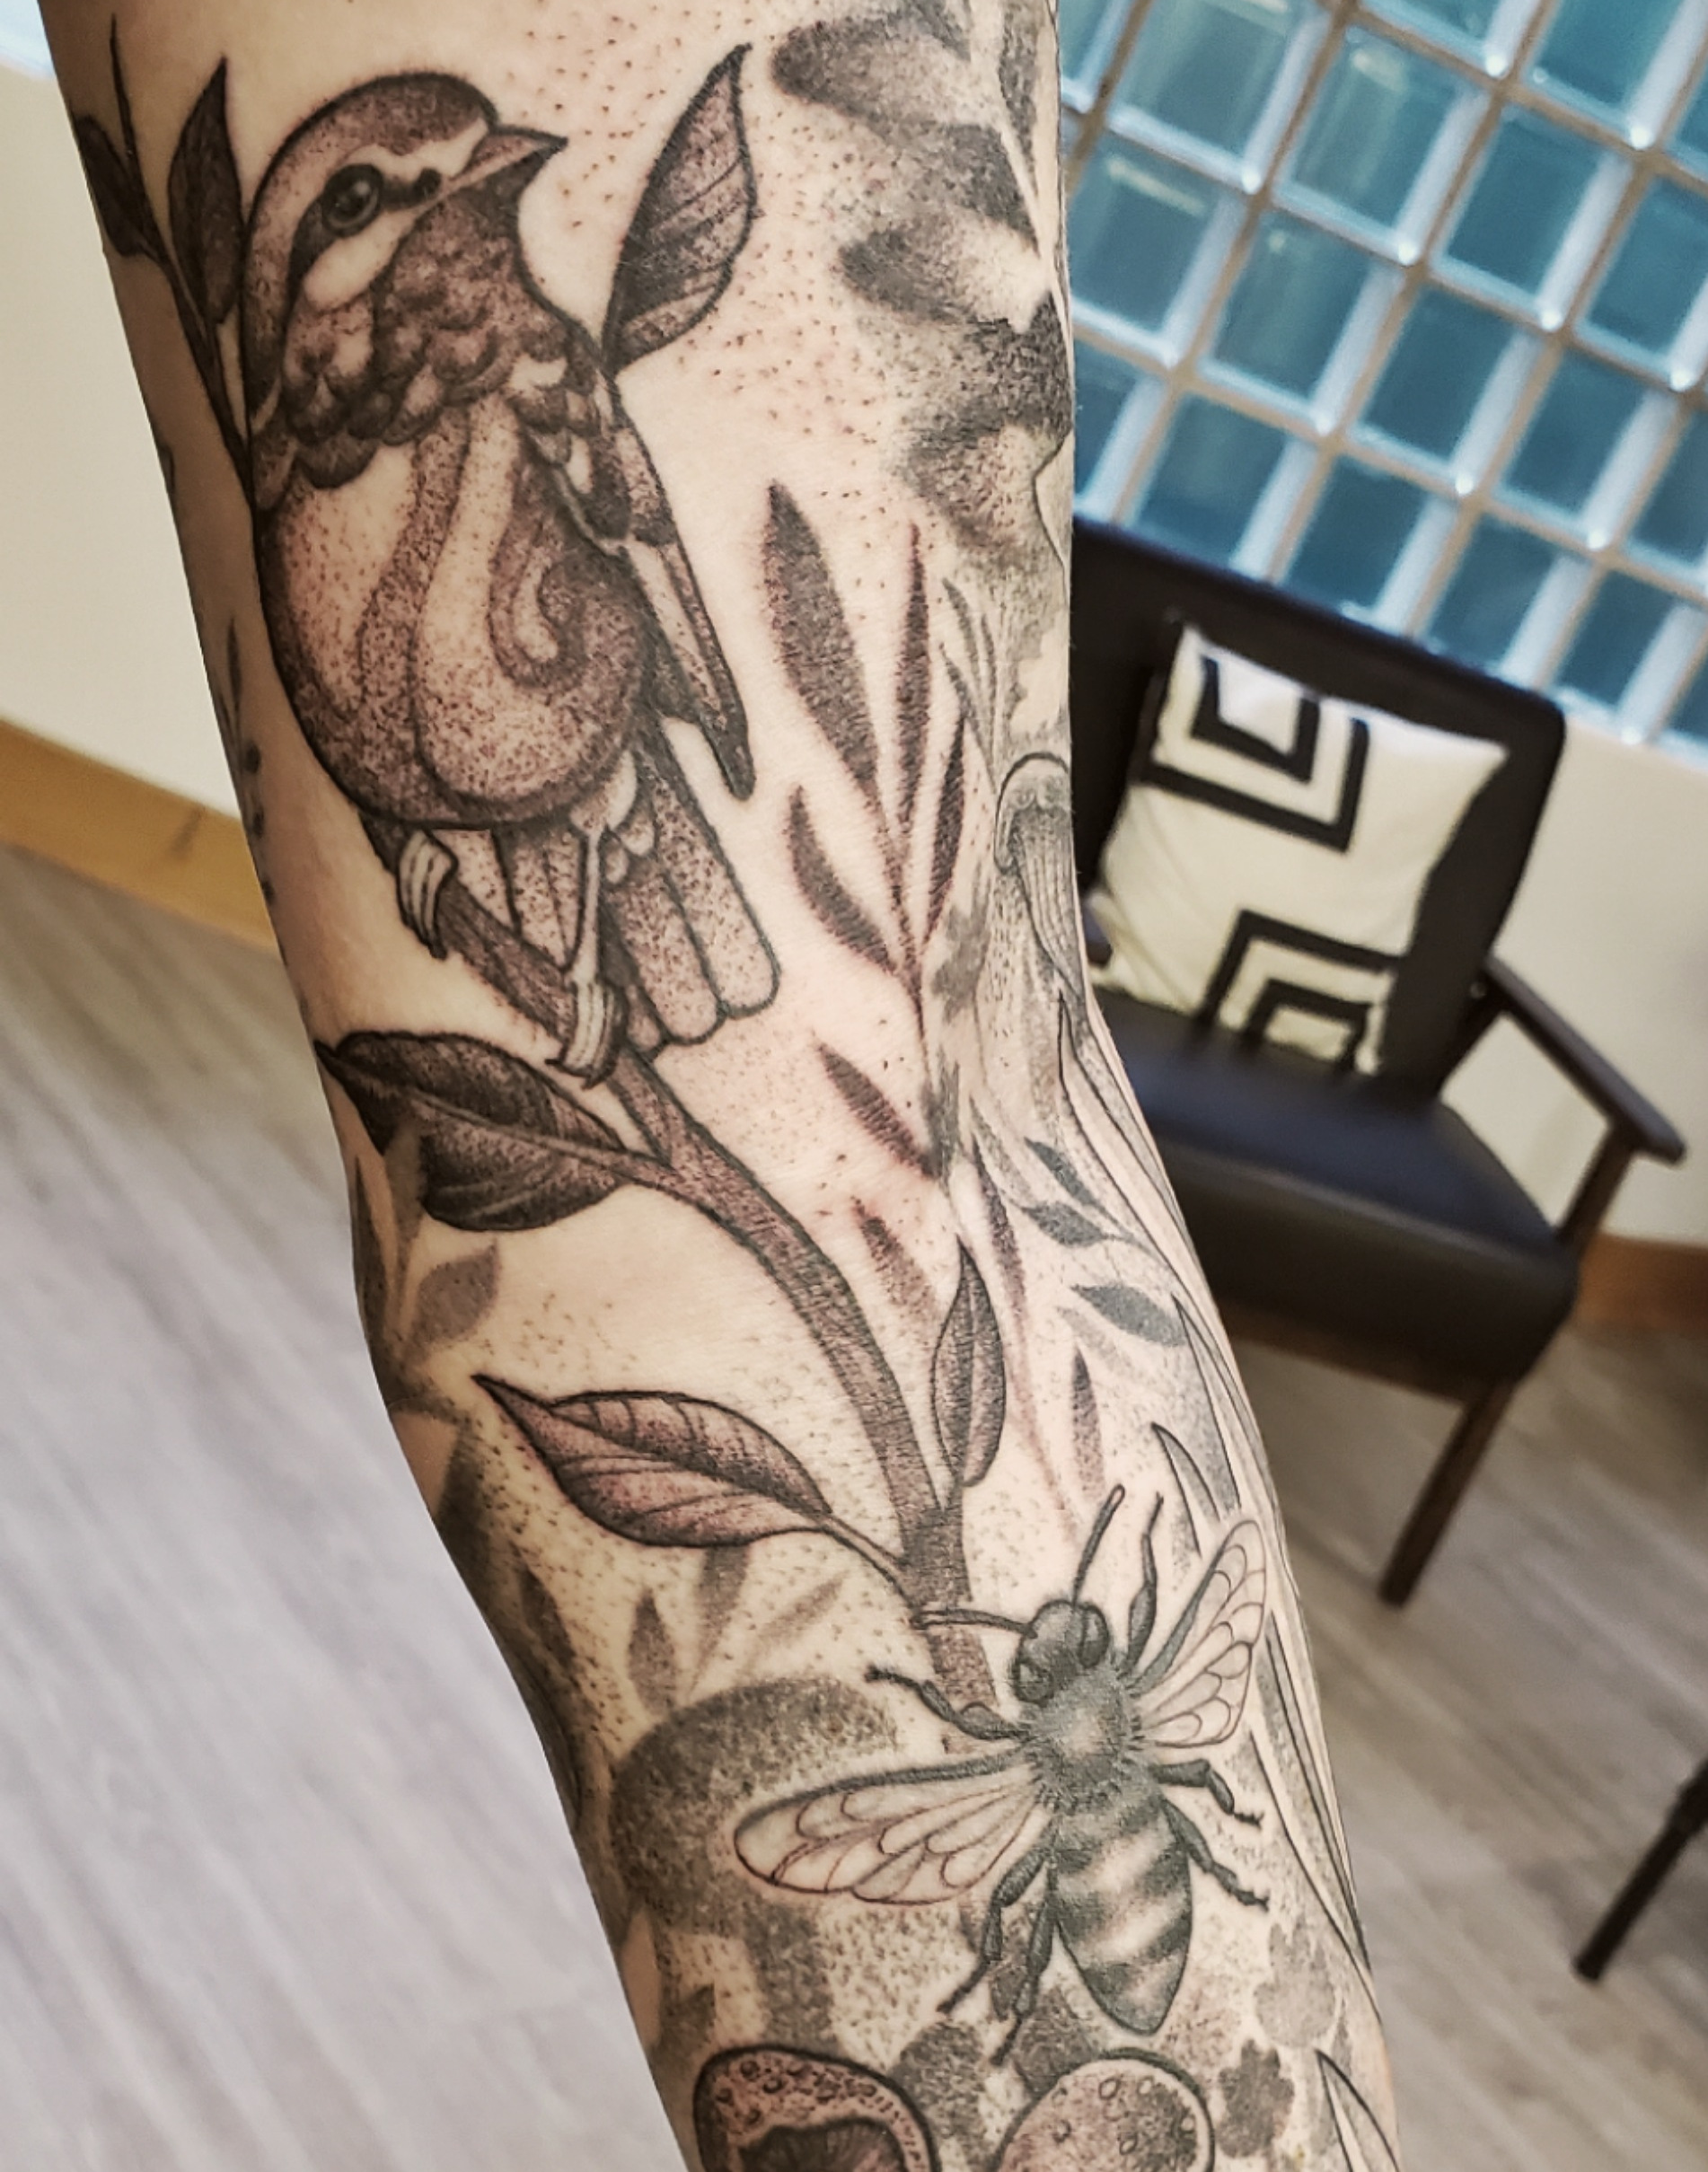 Another view of black and Grey fine line wildlife with birds, bees and mushrooms sleeve tattoo by John Campbell at Sacred Mandala Studio tattoo parlor in Durham, NC.